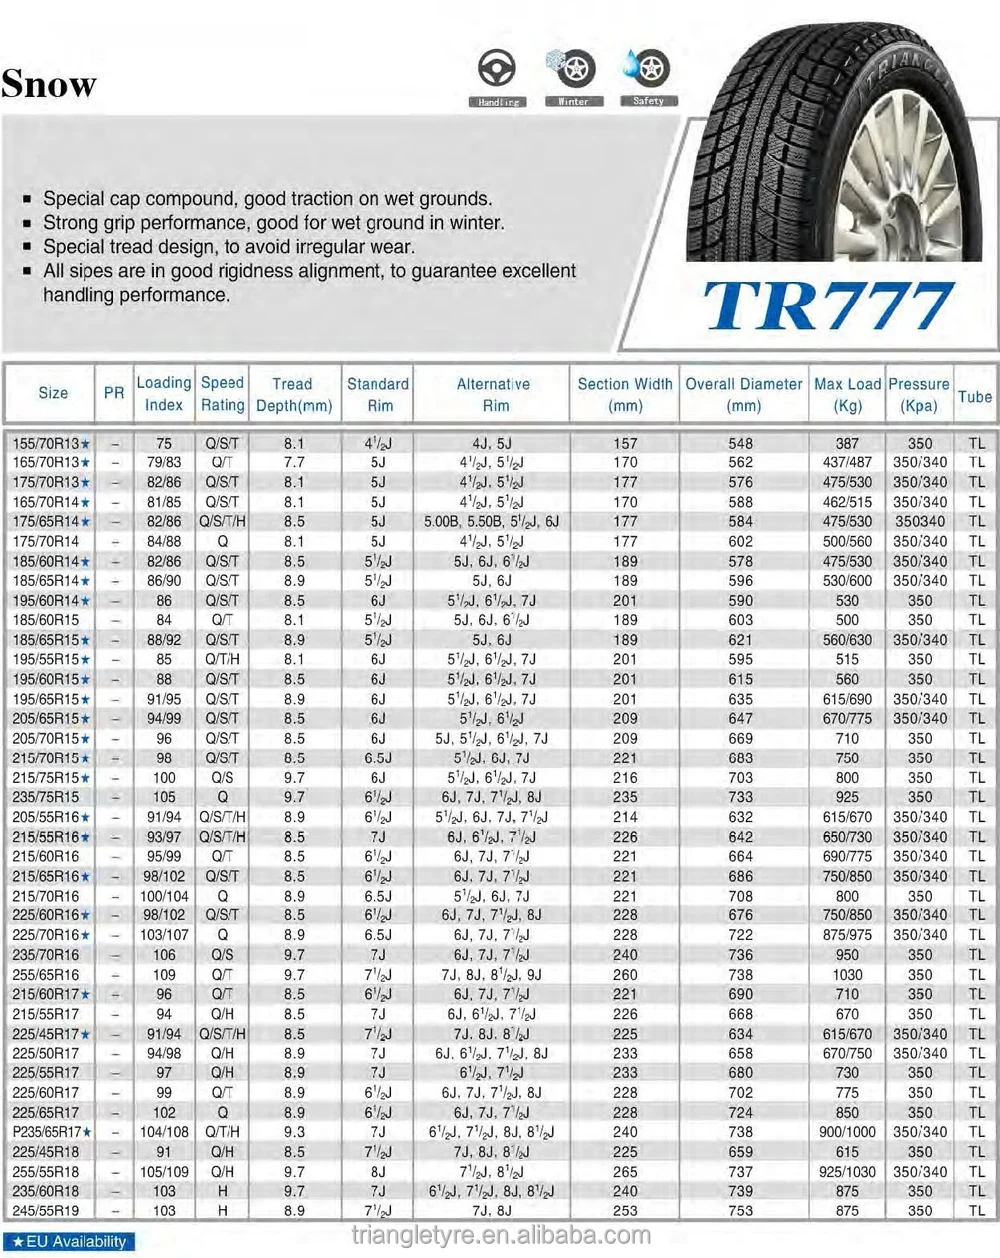 Triangle Tyre Car Tire 175/65r14(tr777)86t - Buy Tire,Winter Tire For ...